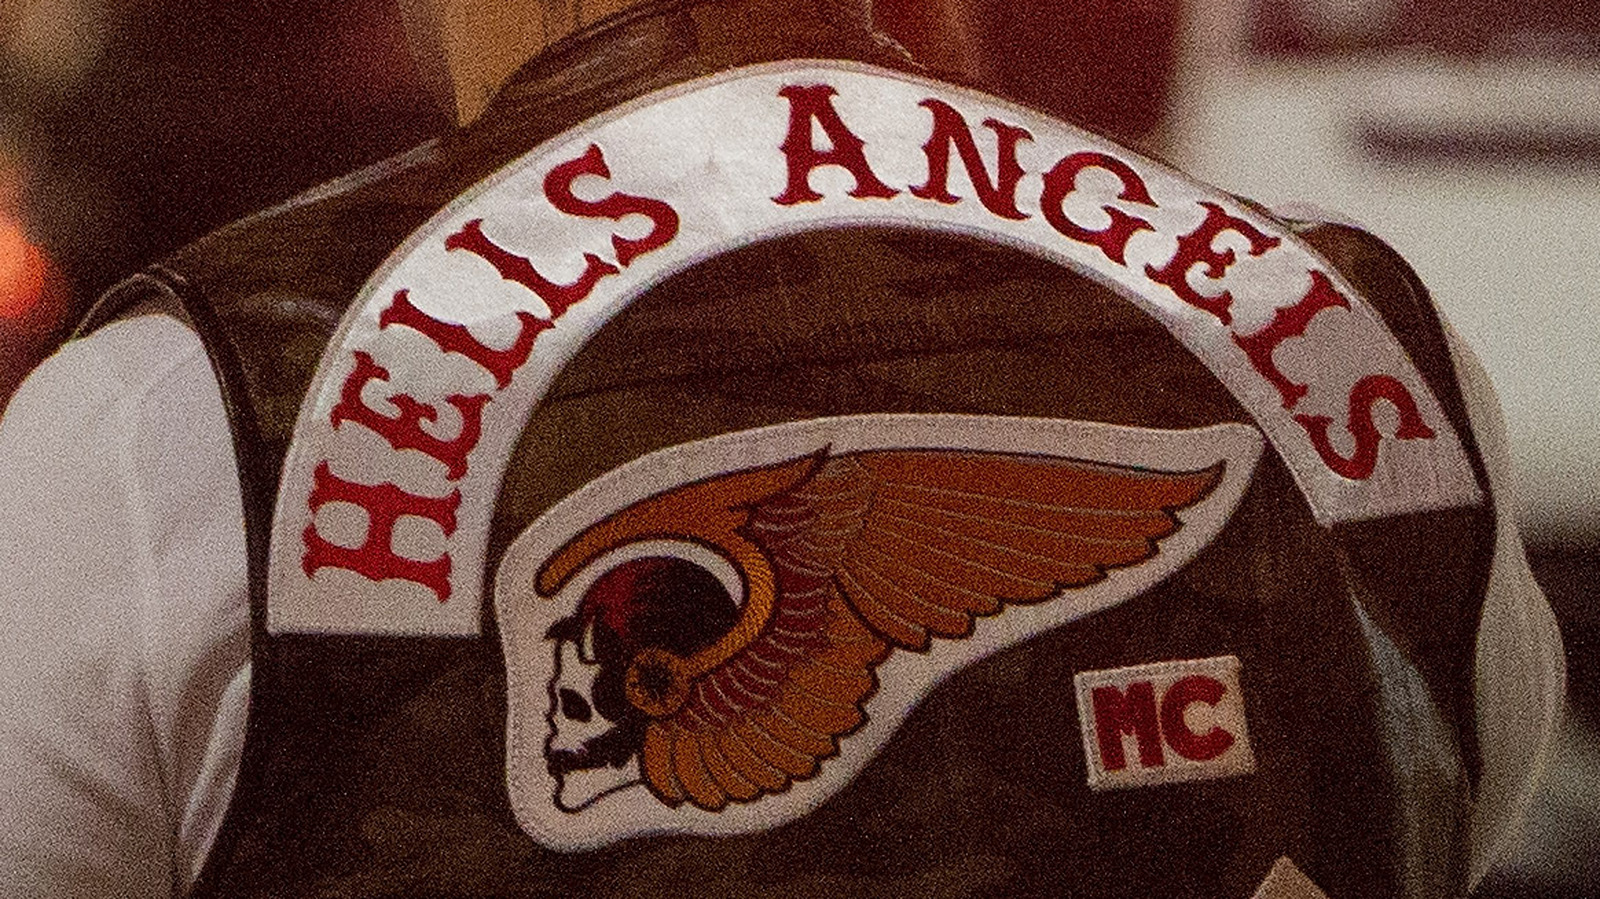 Where Did The Hells Angels Get Their Name?